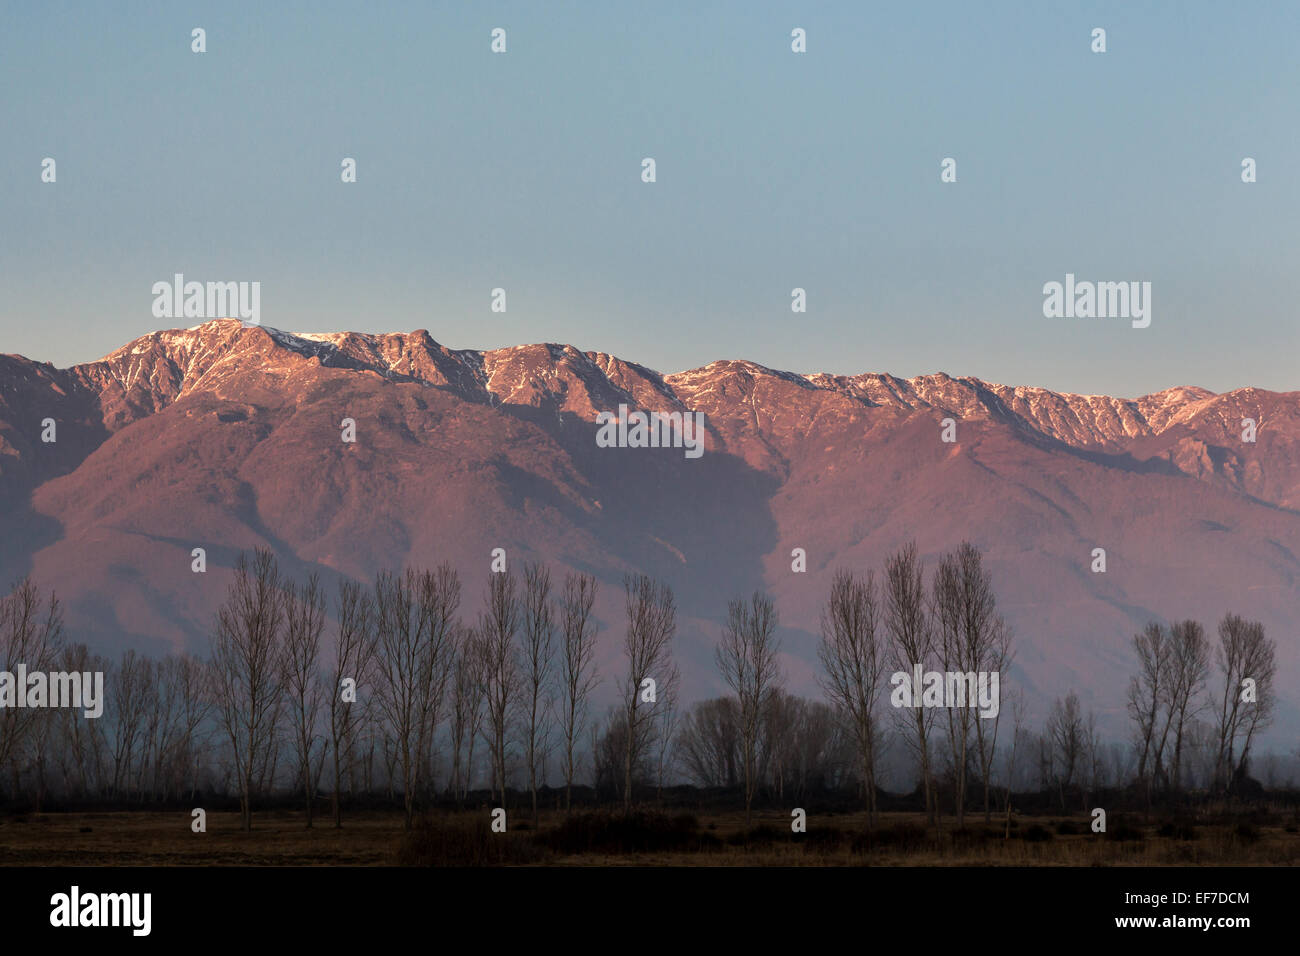 Poplar trees in winter silhouetted against an illuminated Belles mountains in Northern Greece at sunset Stock Photo